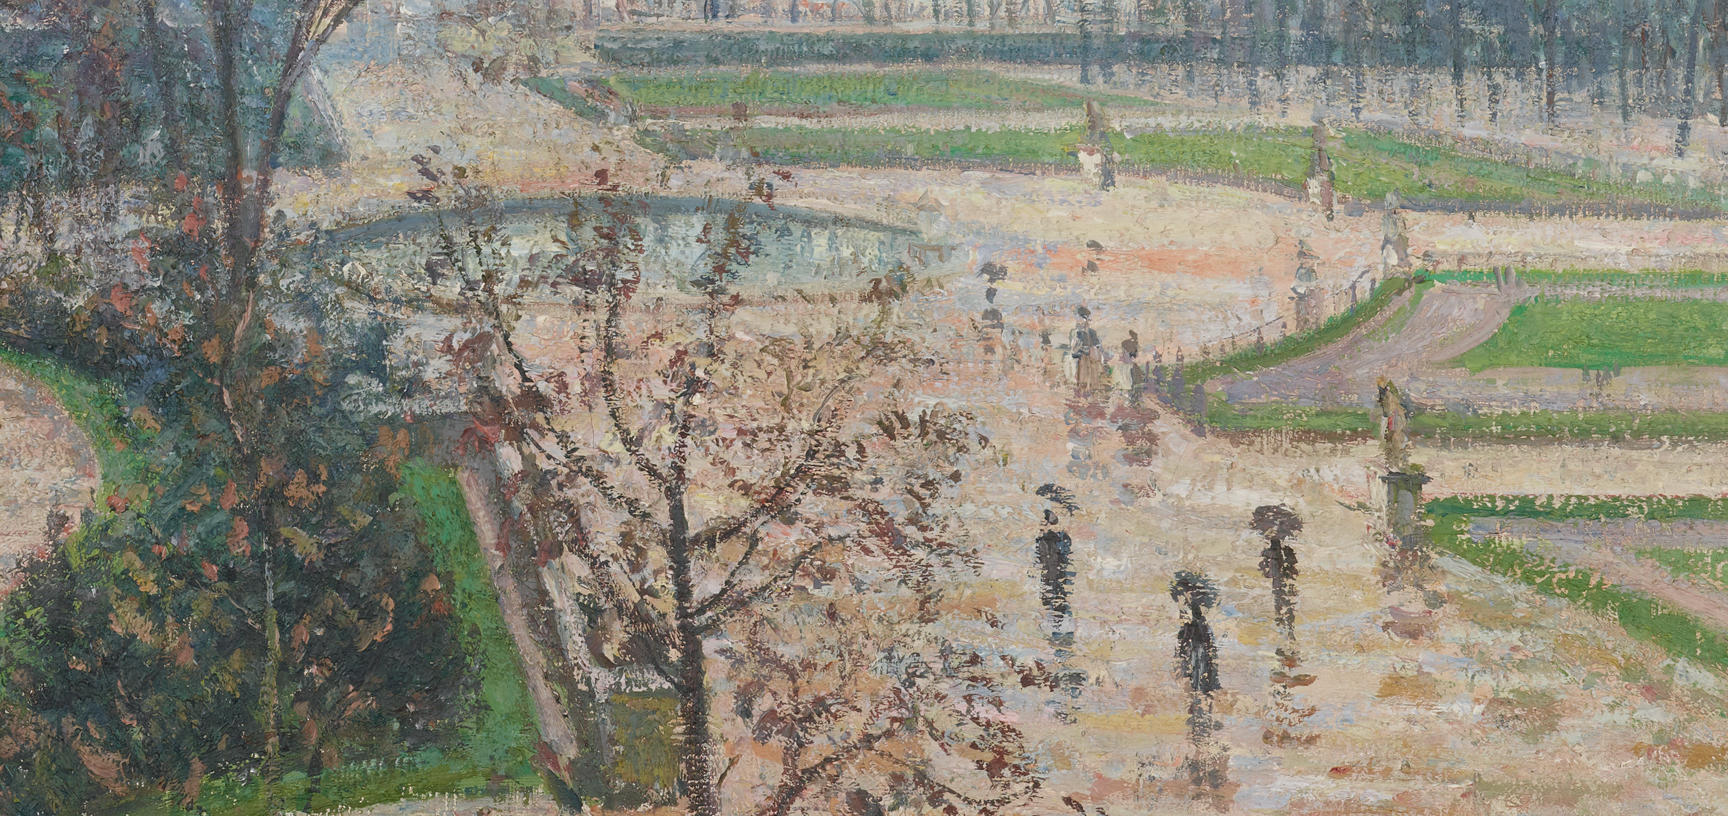 Impressionist painting by Camille Pissarro of landscaped gardens in the rain, with a cloudy sky behind